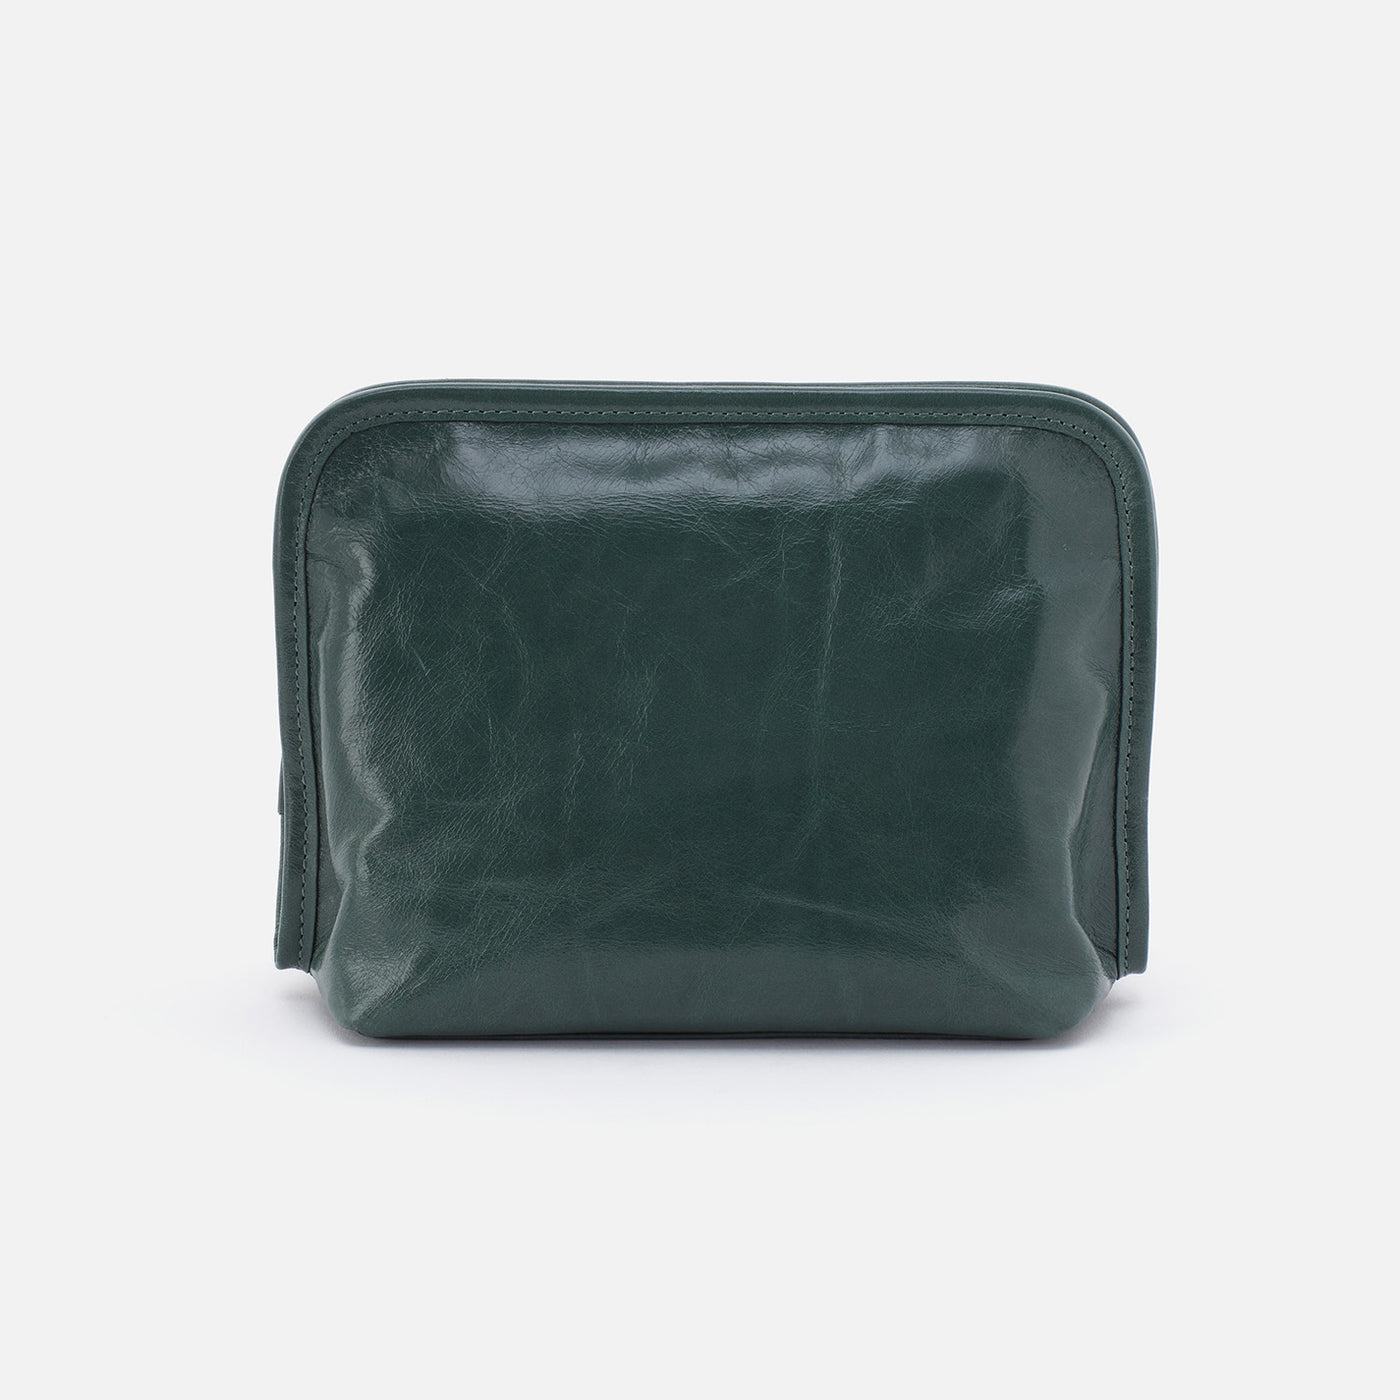 Beauty Cosmetic Pouch in Polished Leather - Sage Leaf